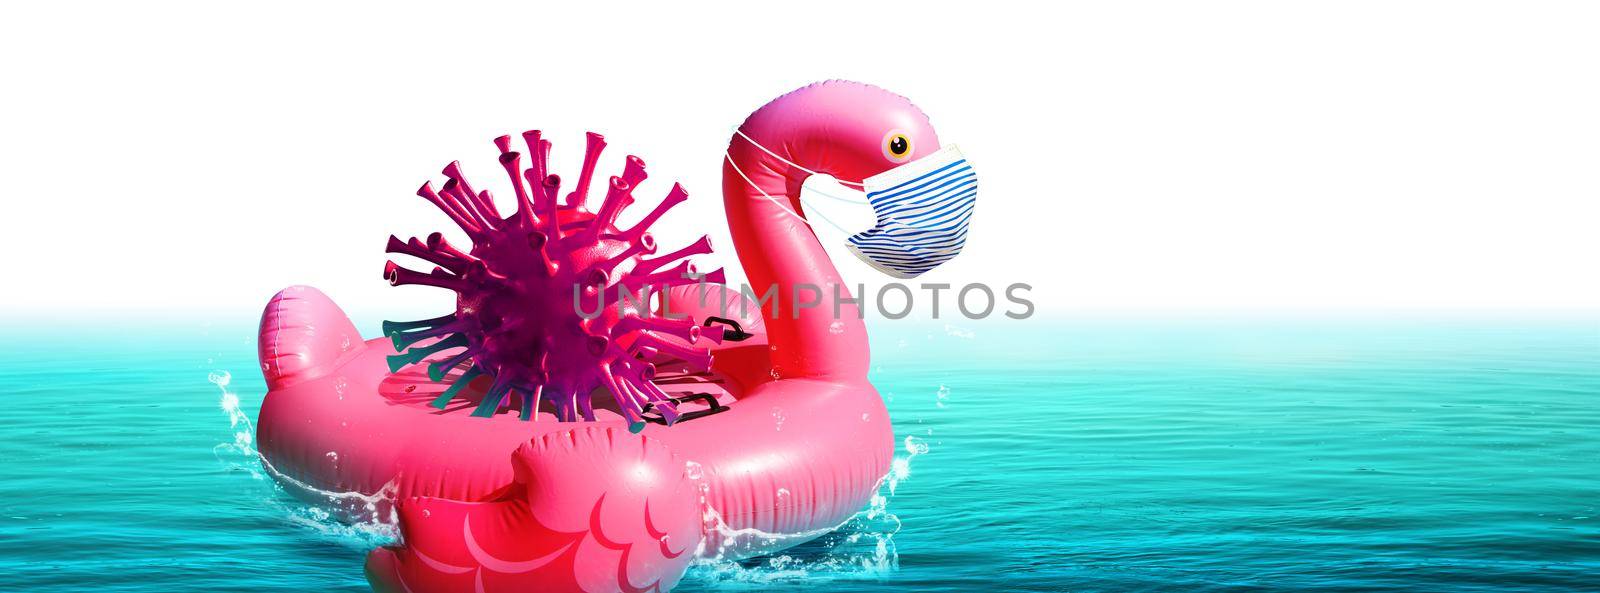 Inflatable swan with corona virus mask on vacation by Taut